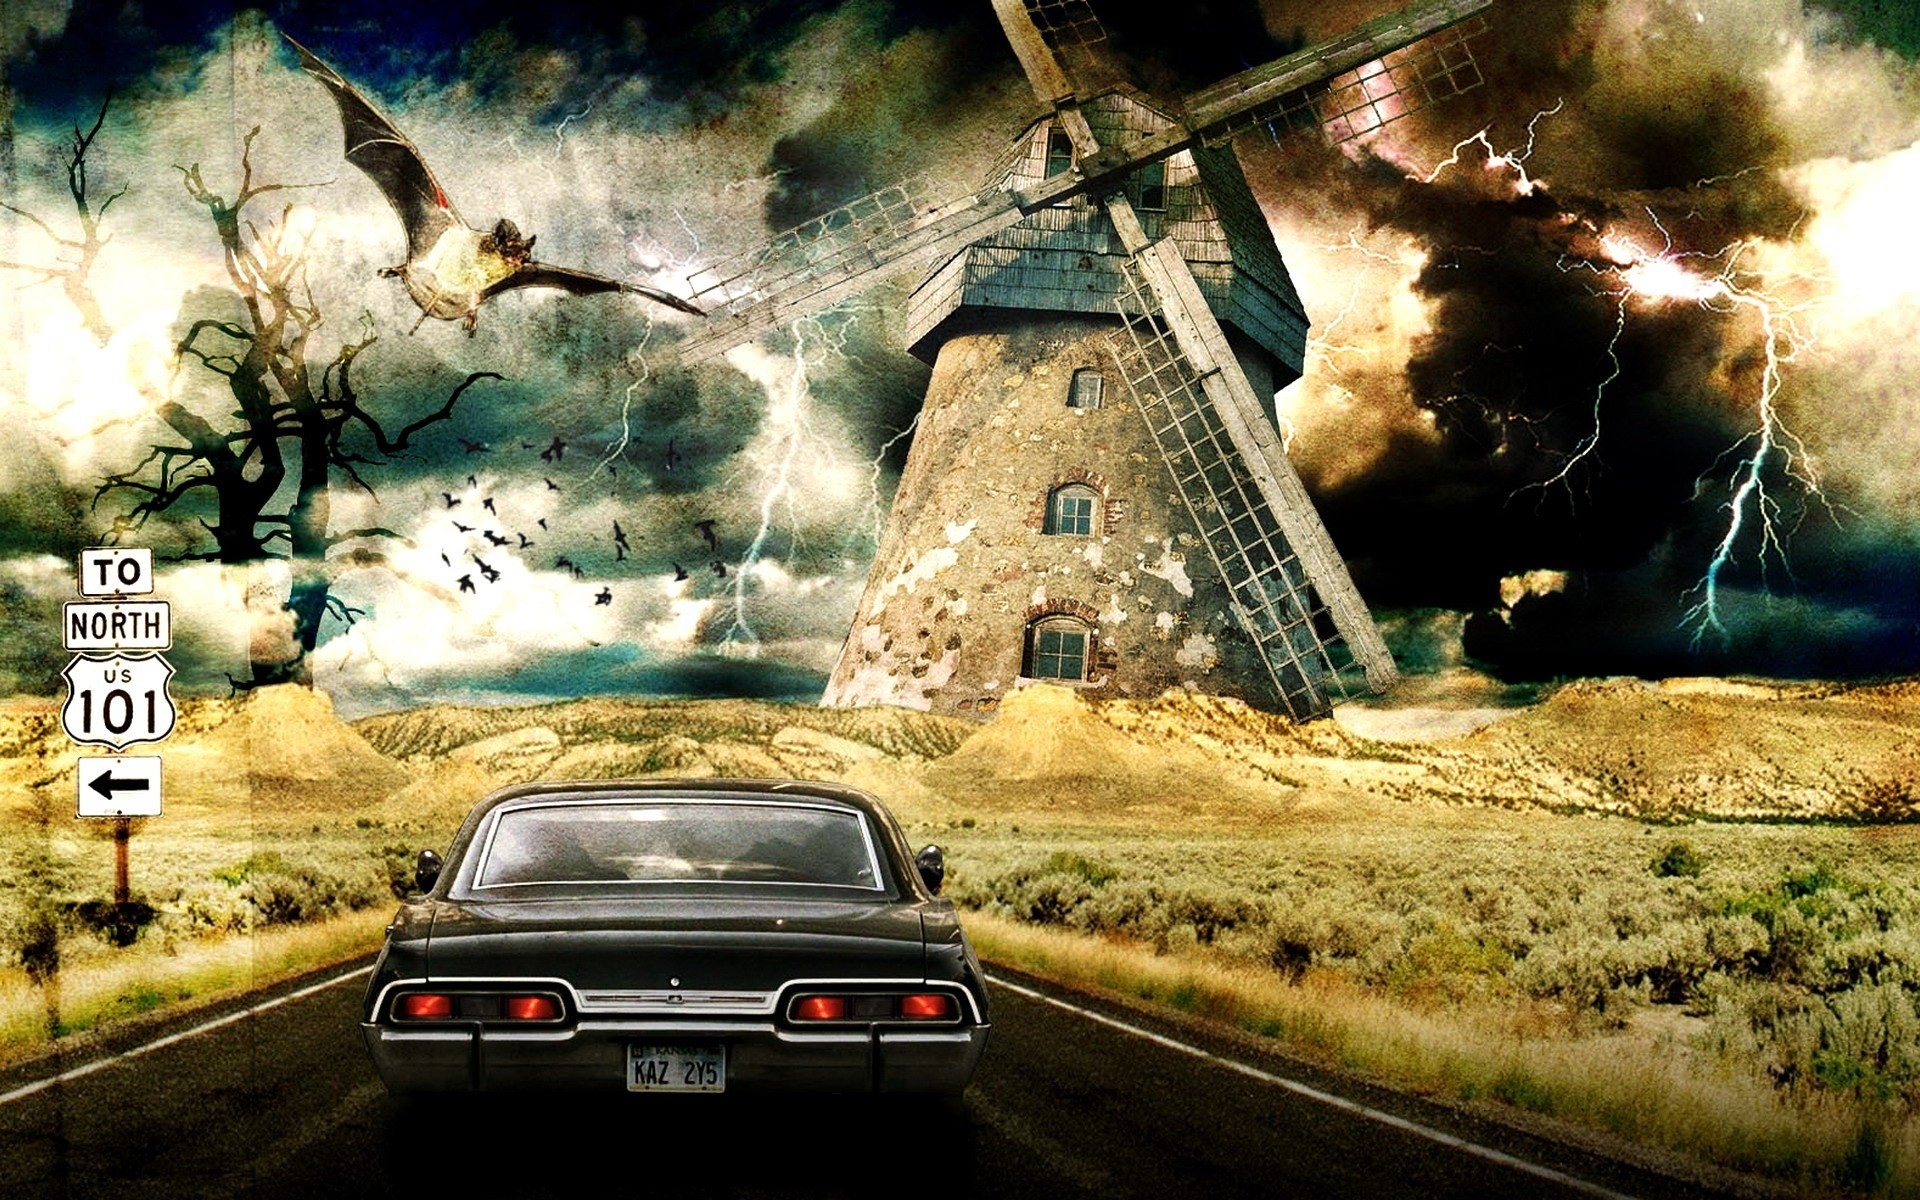 HD Wallpaper and background photos of the road so far for fans of Supernatural images